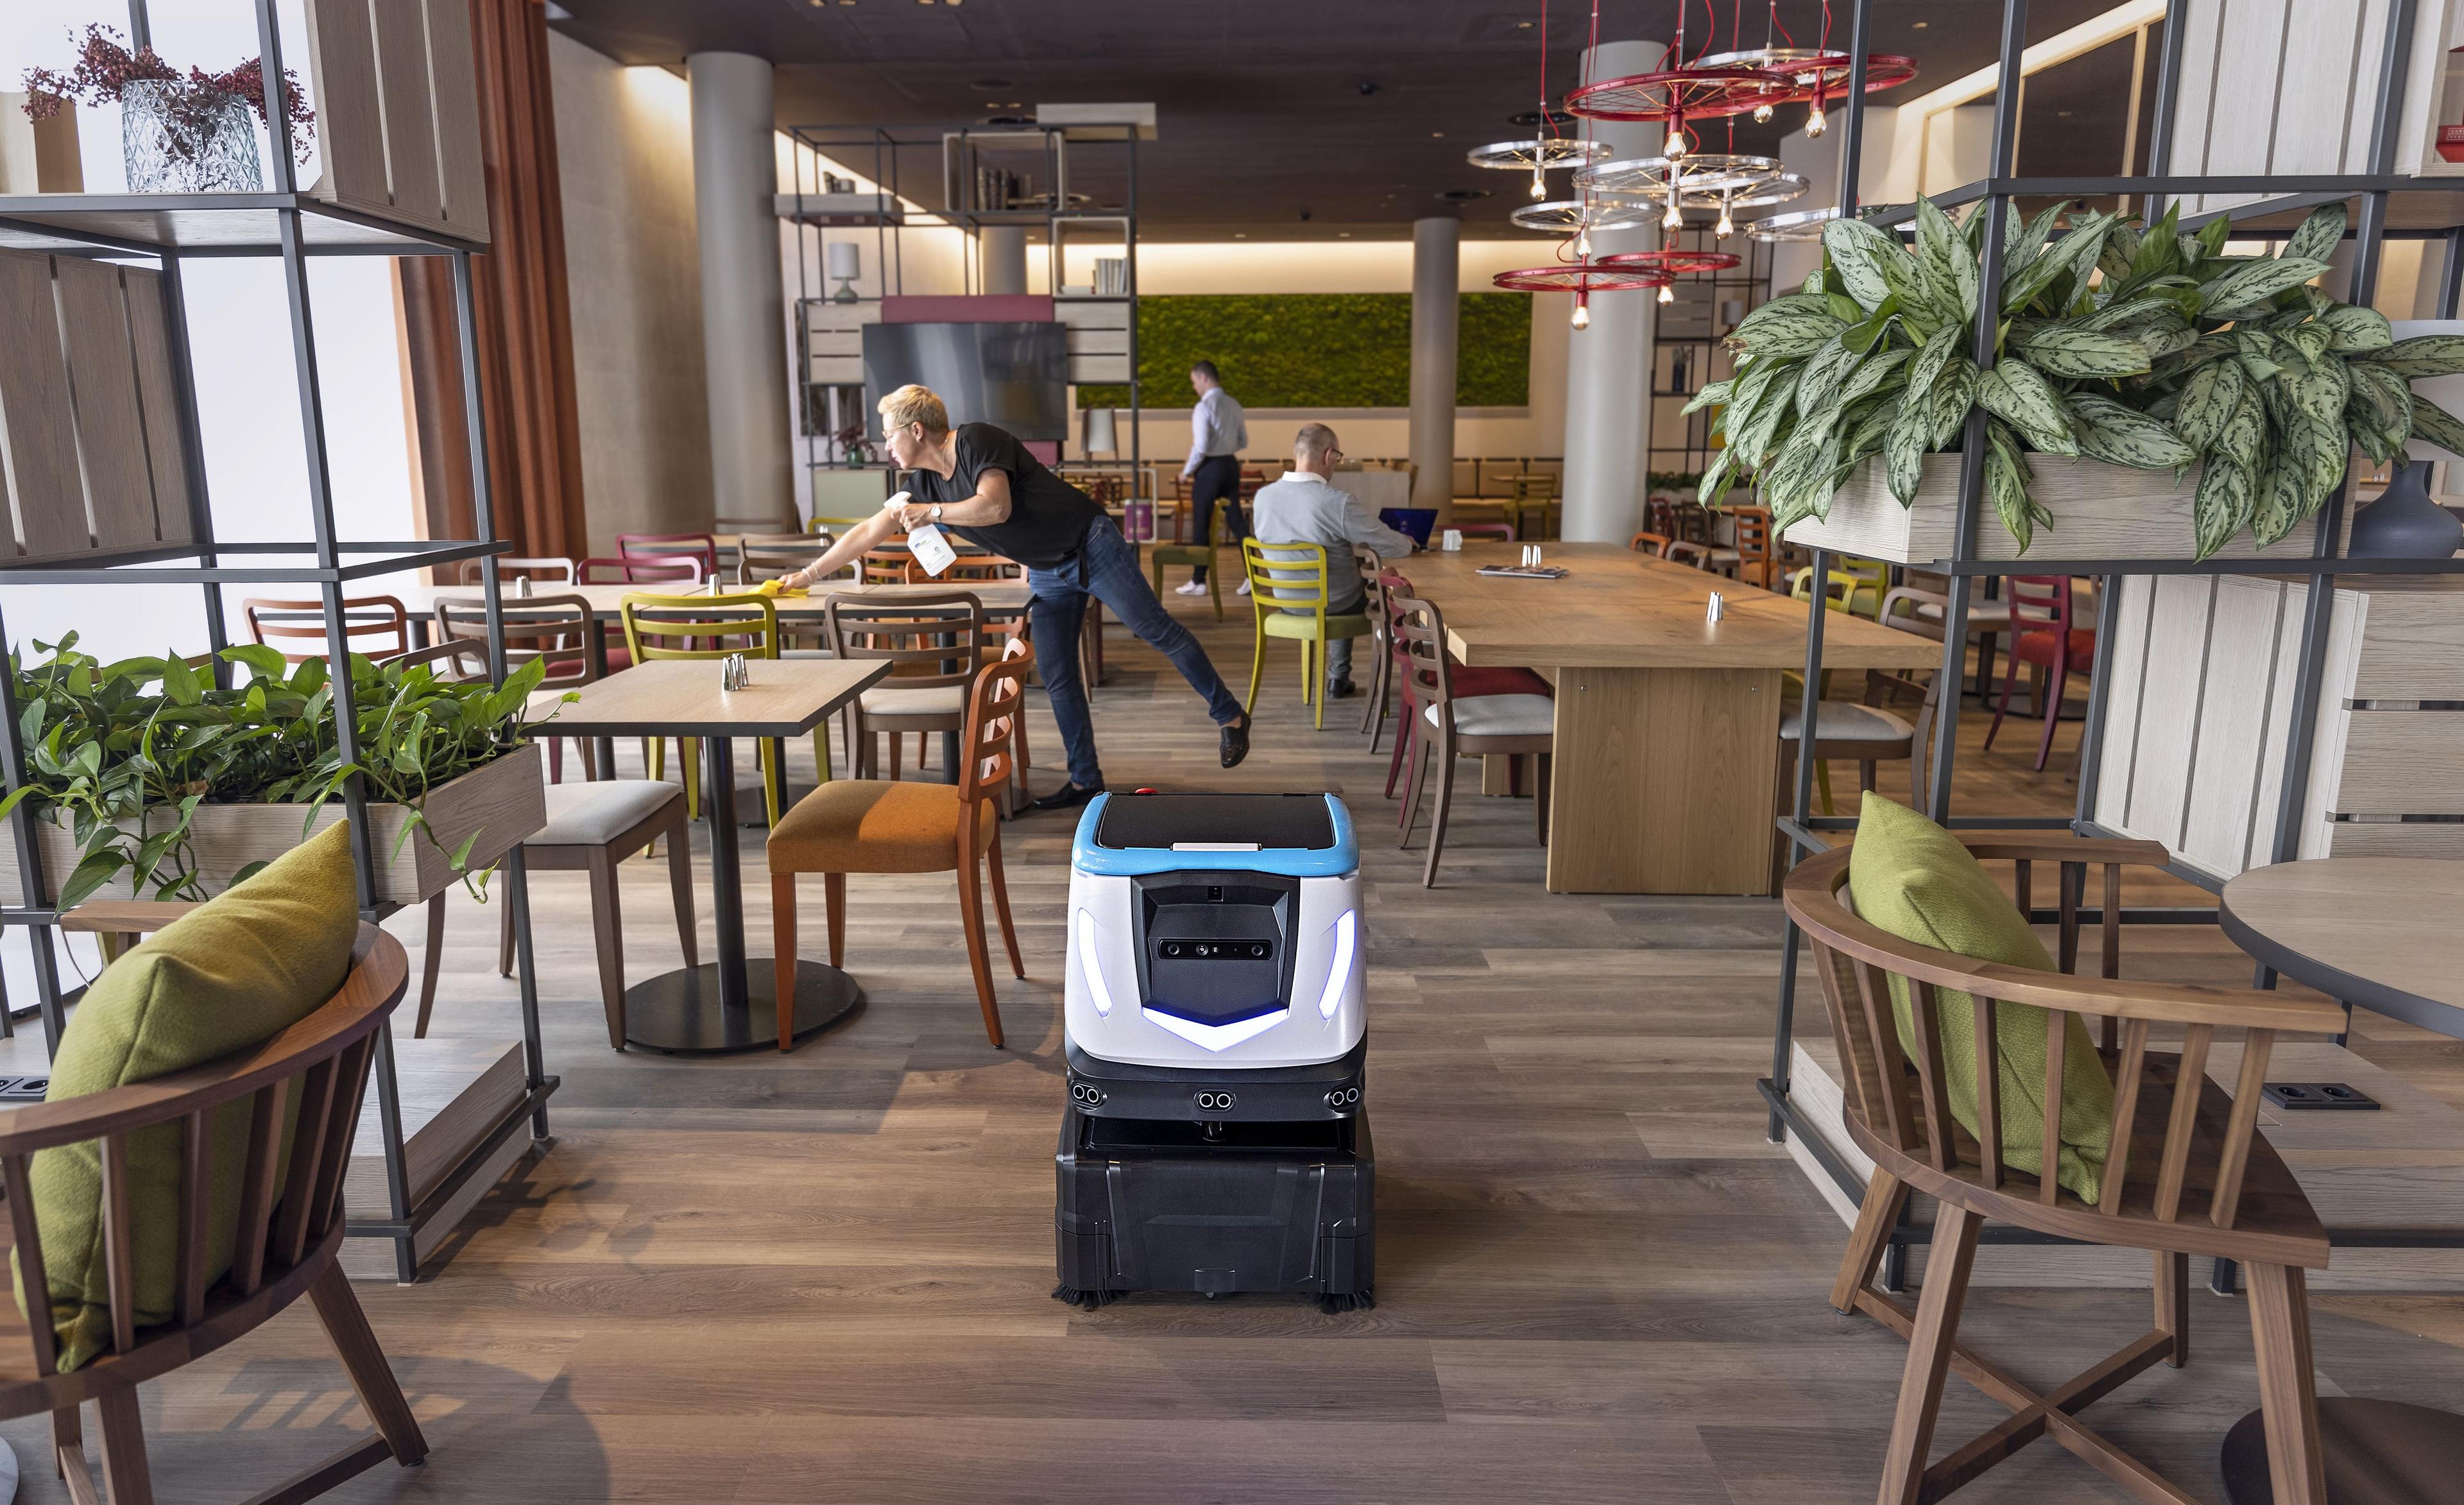 ICE Cobotics Cobi 18 cleaning floors in hotel restaurant while workers clean tables and guests eat breakfast